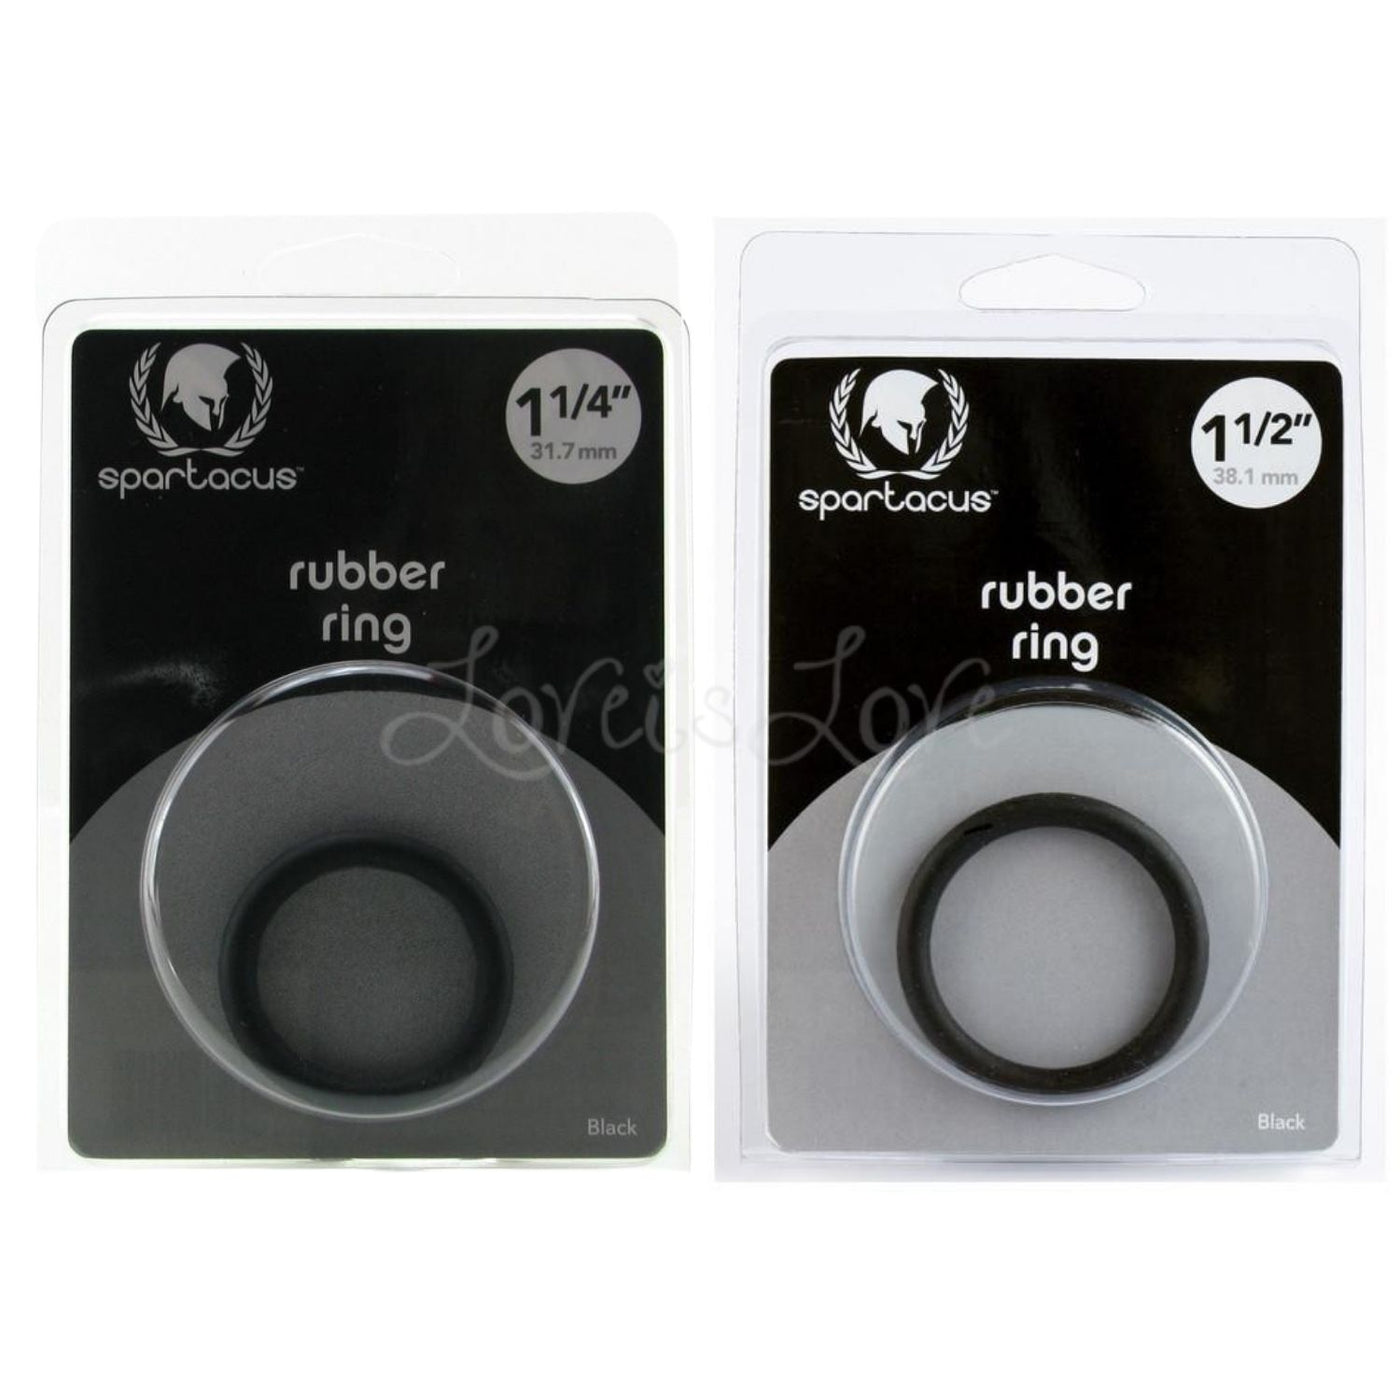 Spartacus Rubber C Ring 1.25 Inch 31.7 mm or 1.5 inch 38.1 mm